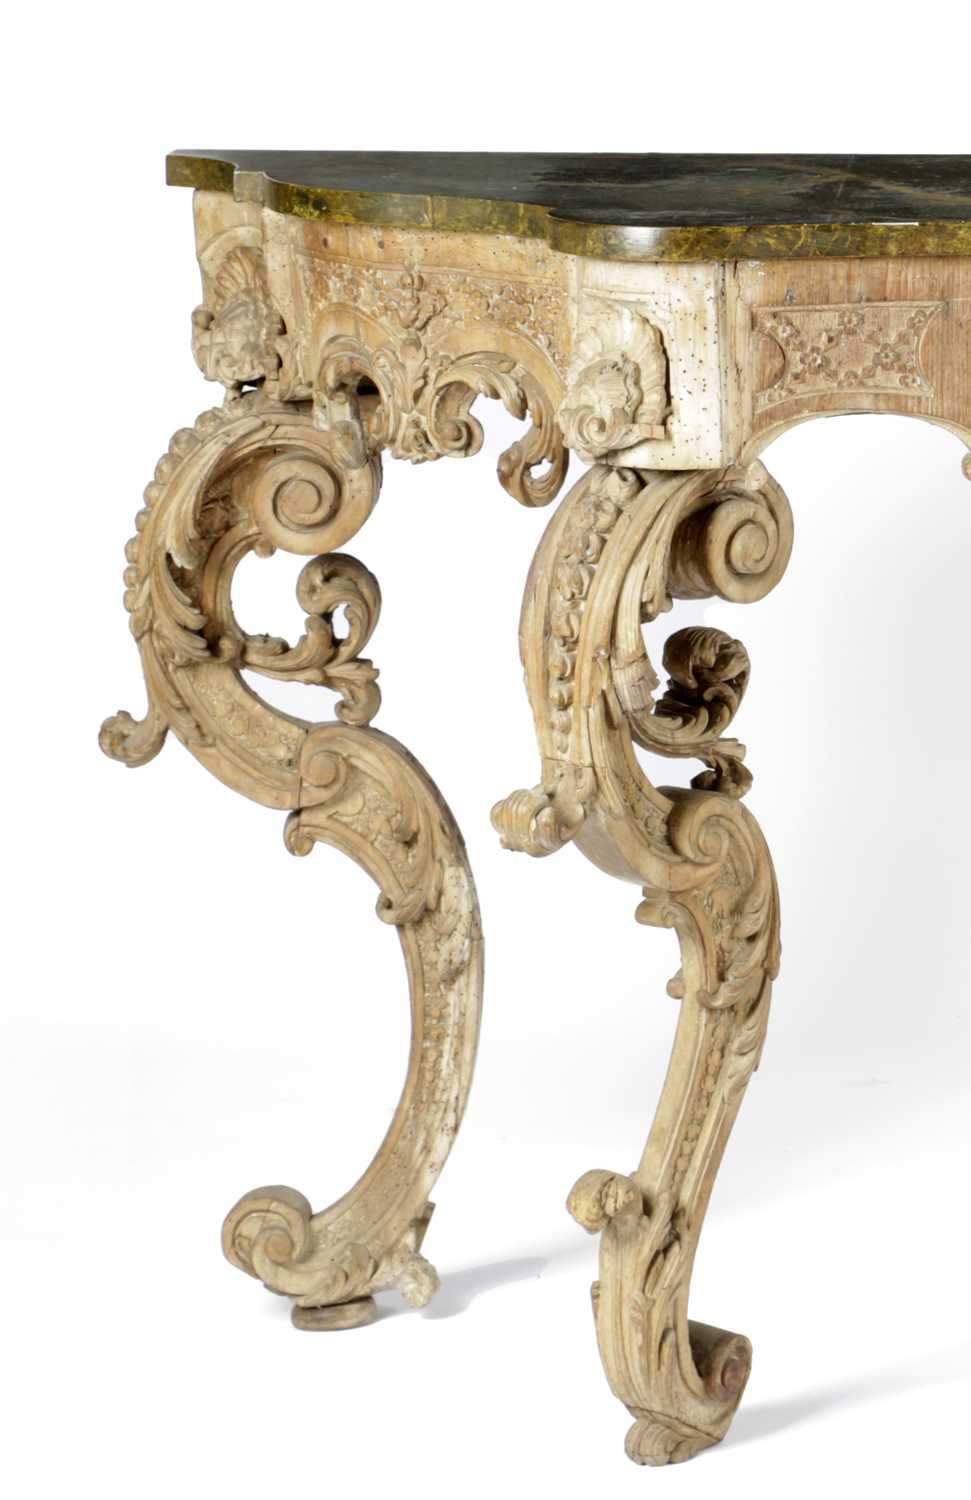 A ROCOCO CARVED WALNUT CONSOLE TABLE POSSIBLY GERMAN OR ITALIAN, 18TH CENTURY AND LATER the later - Image 6 of 6